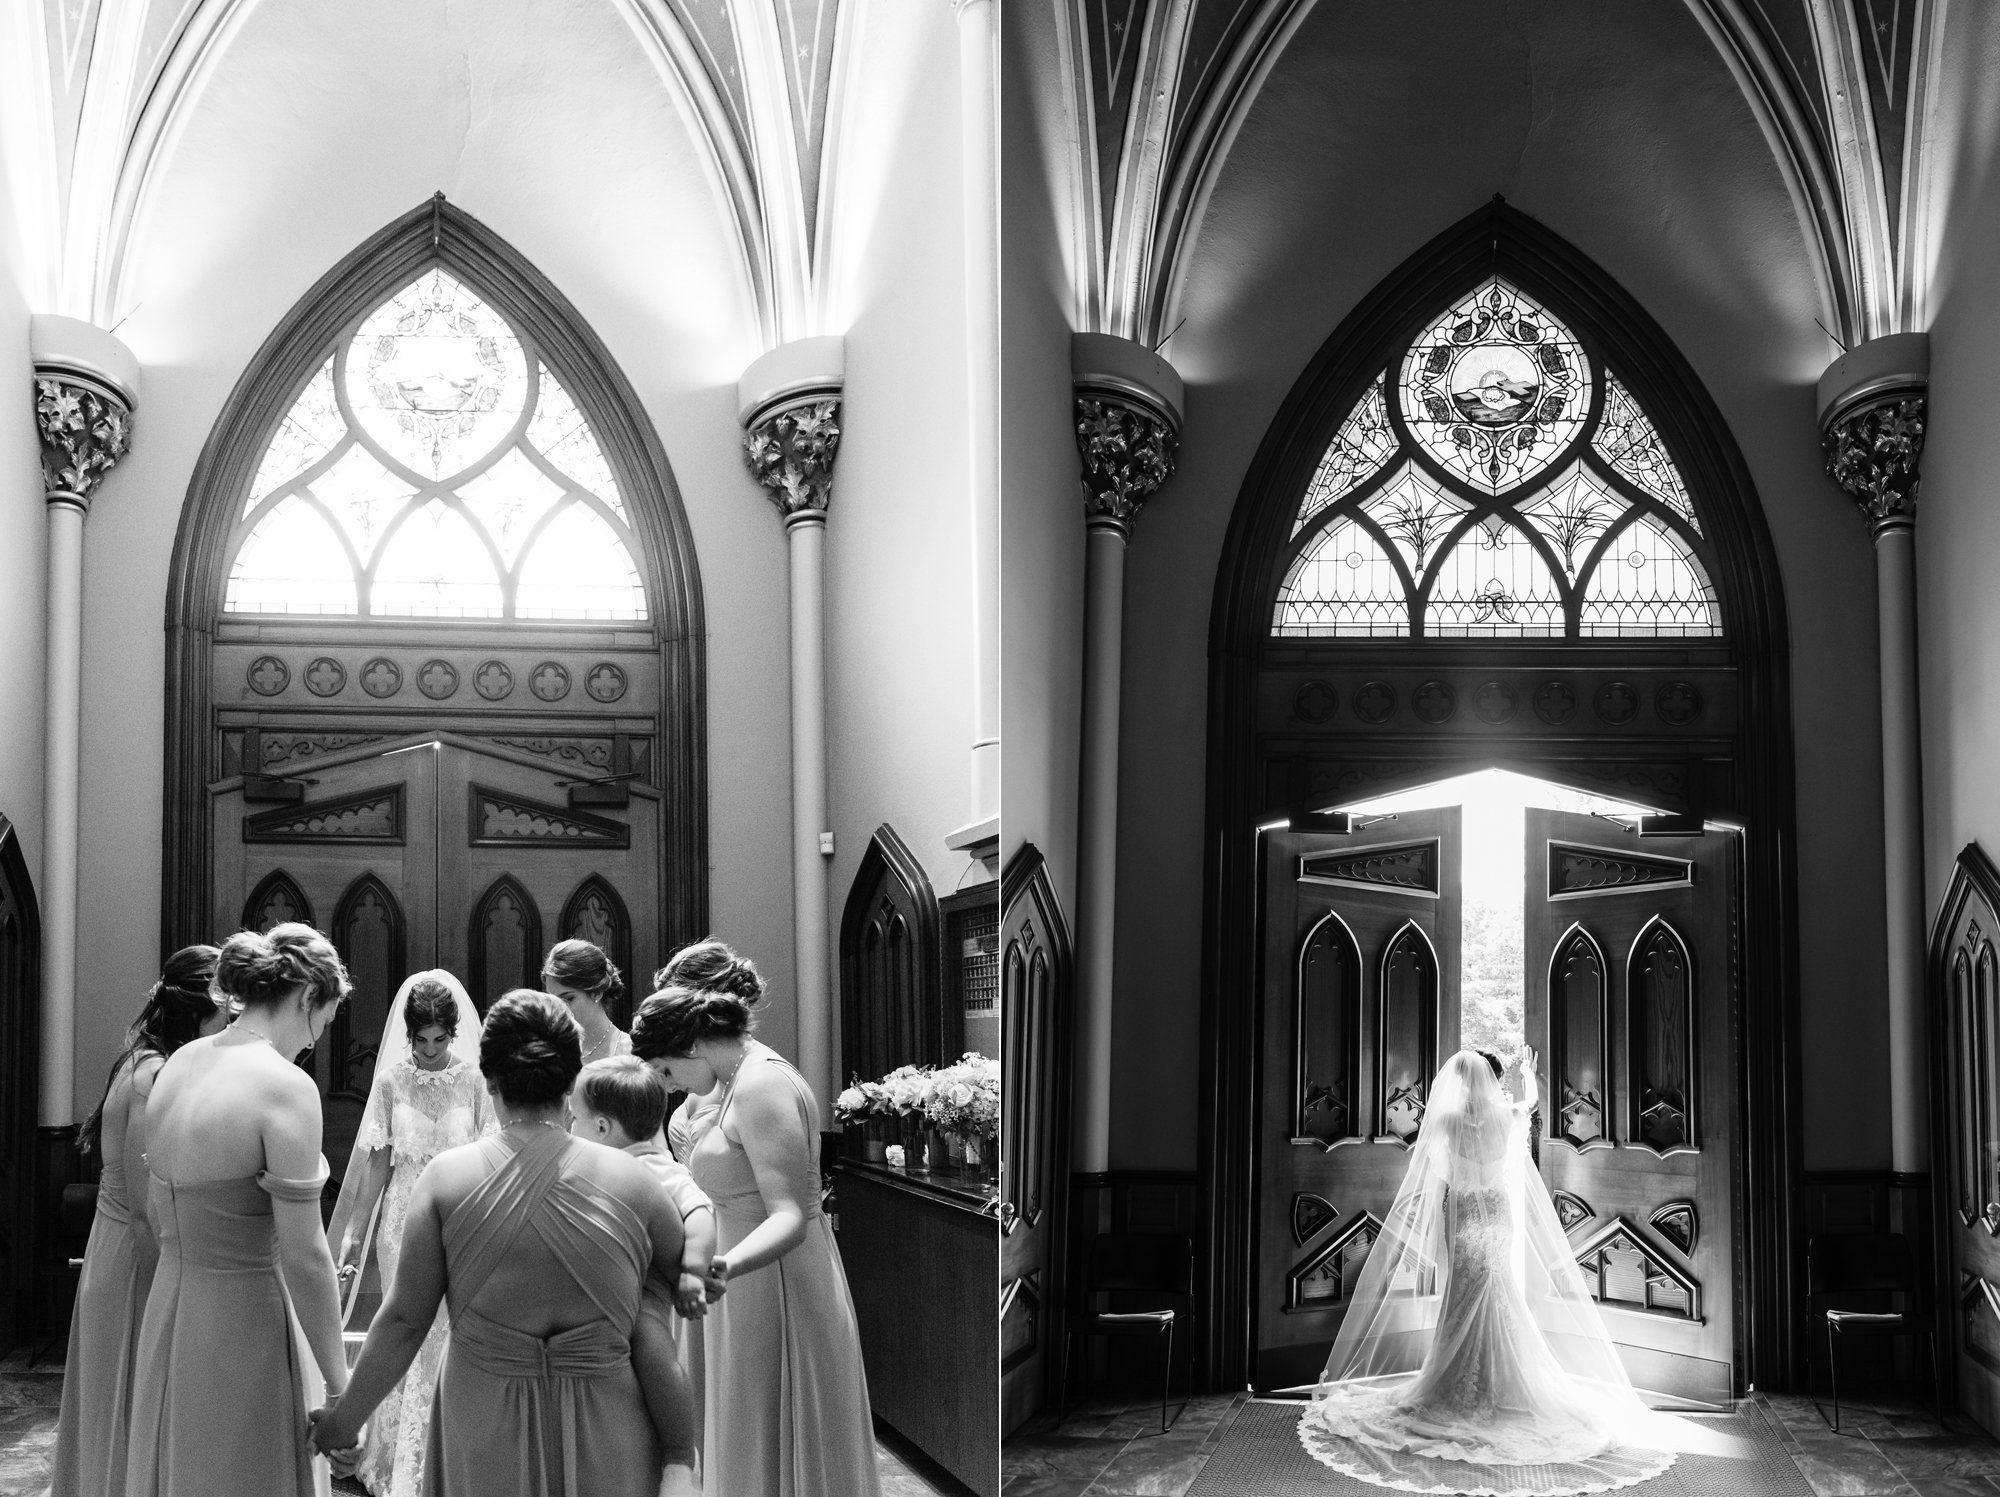 Bride & Groom before their wedding ceremony at the Basilica of the Sacred Heart on the campus of the University of Notre Dame